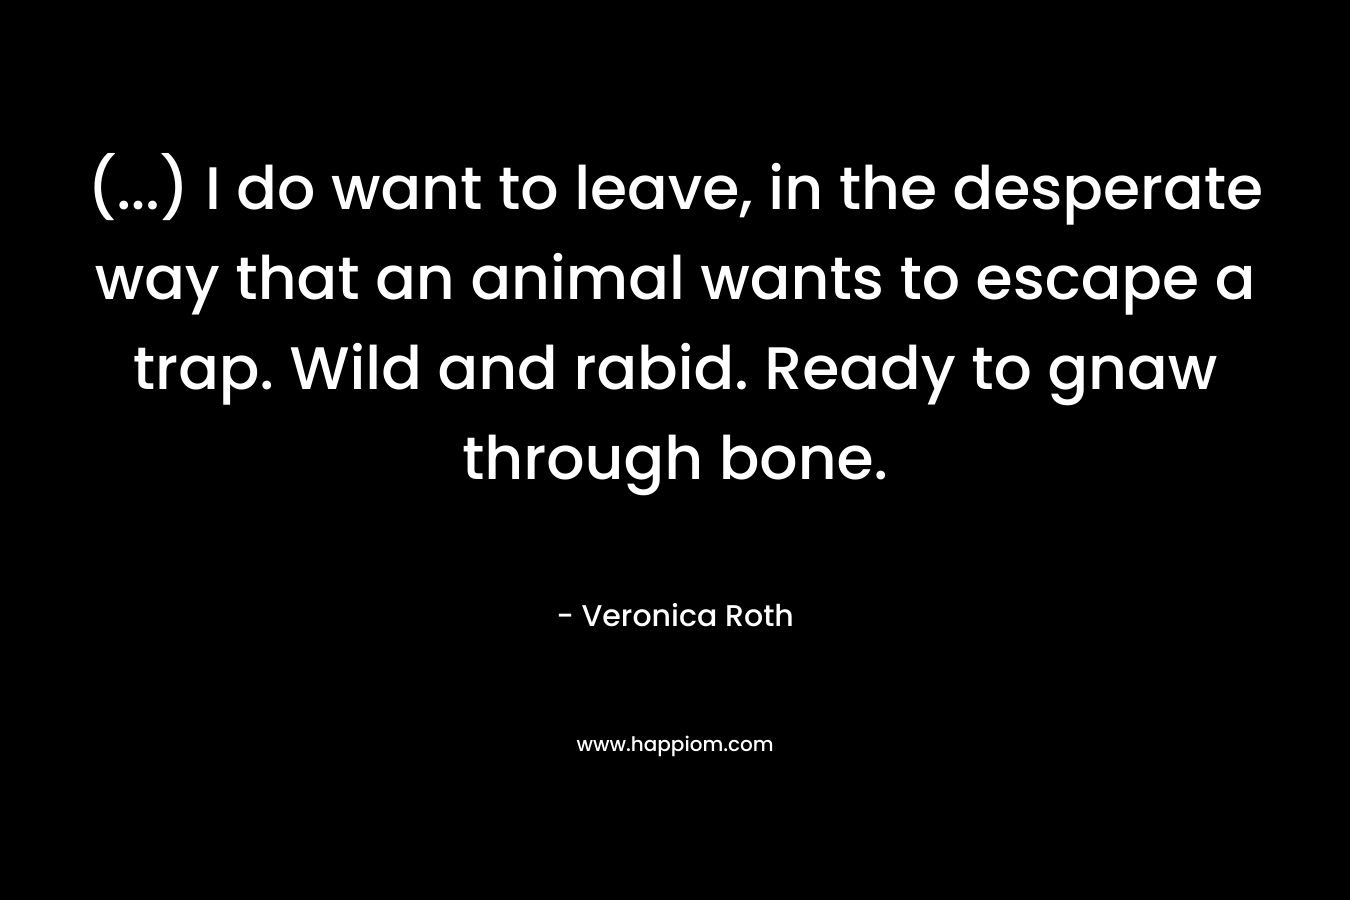 (…) I do want to leave, in the desperate way that an animal wants to escape a trap. Wild and rabid. Ready to gnaw through bone. – Veronica Roth